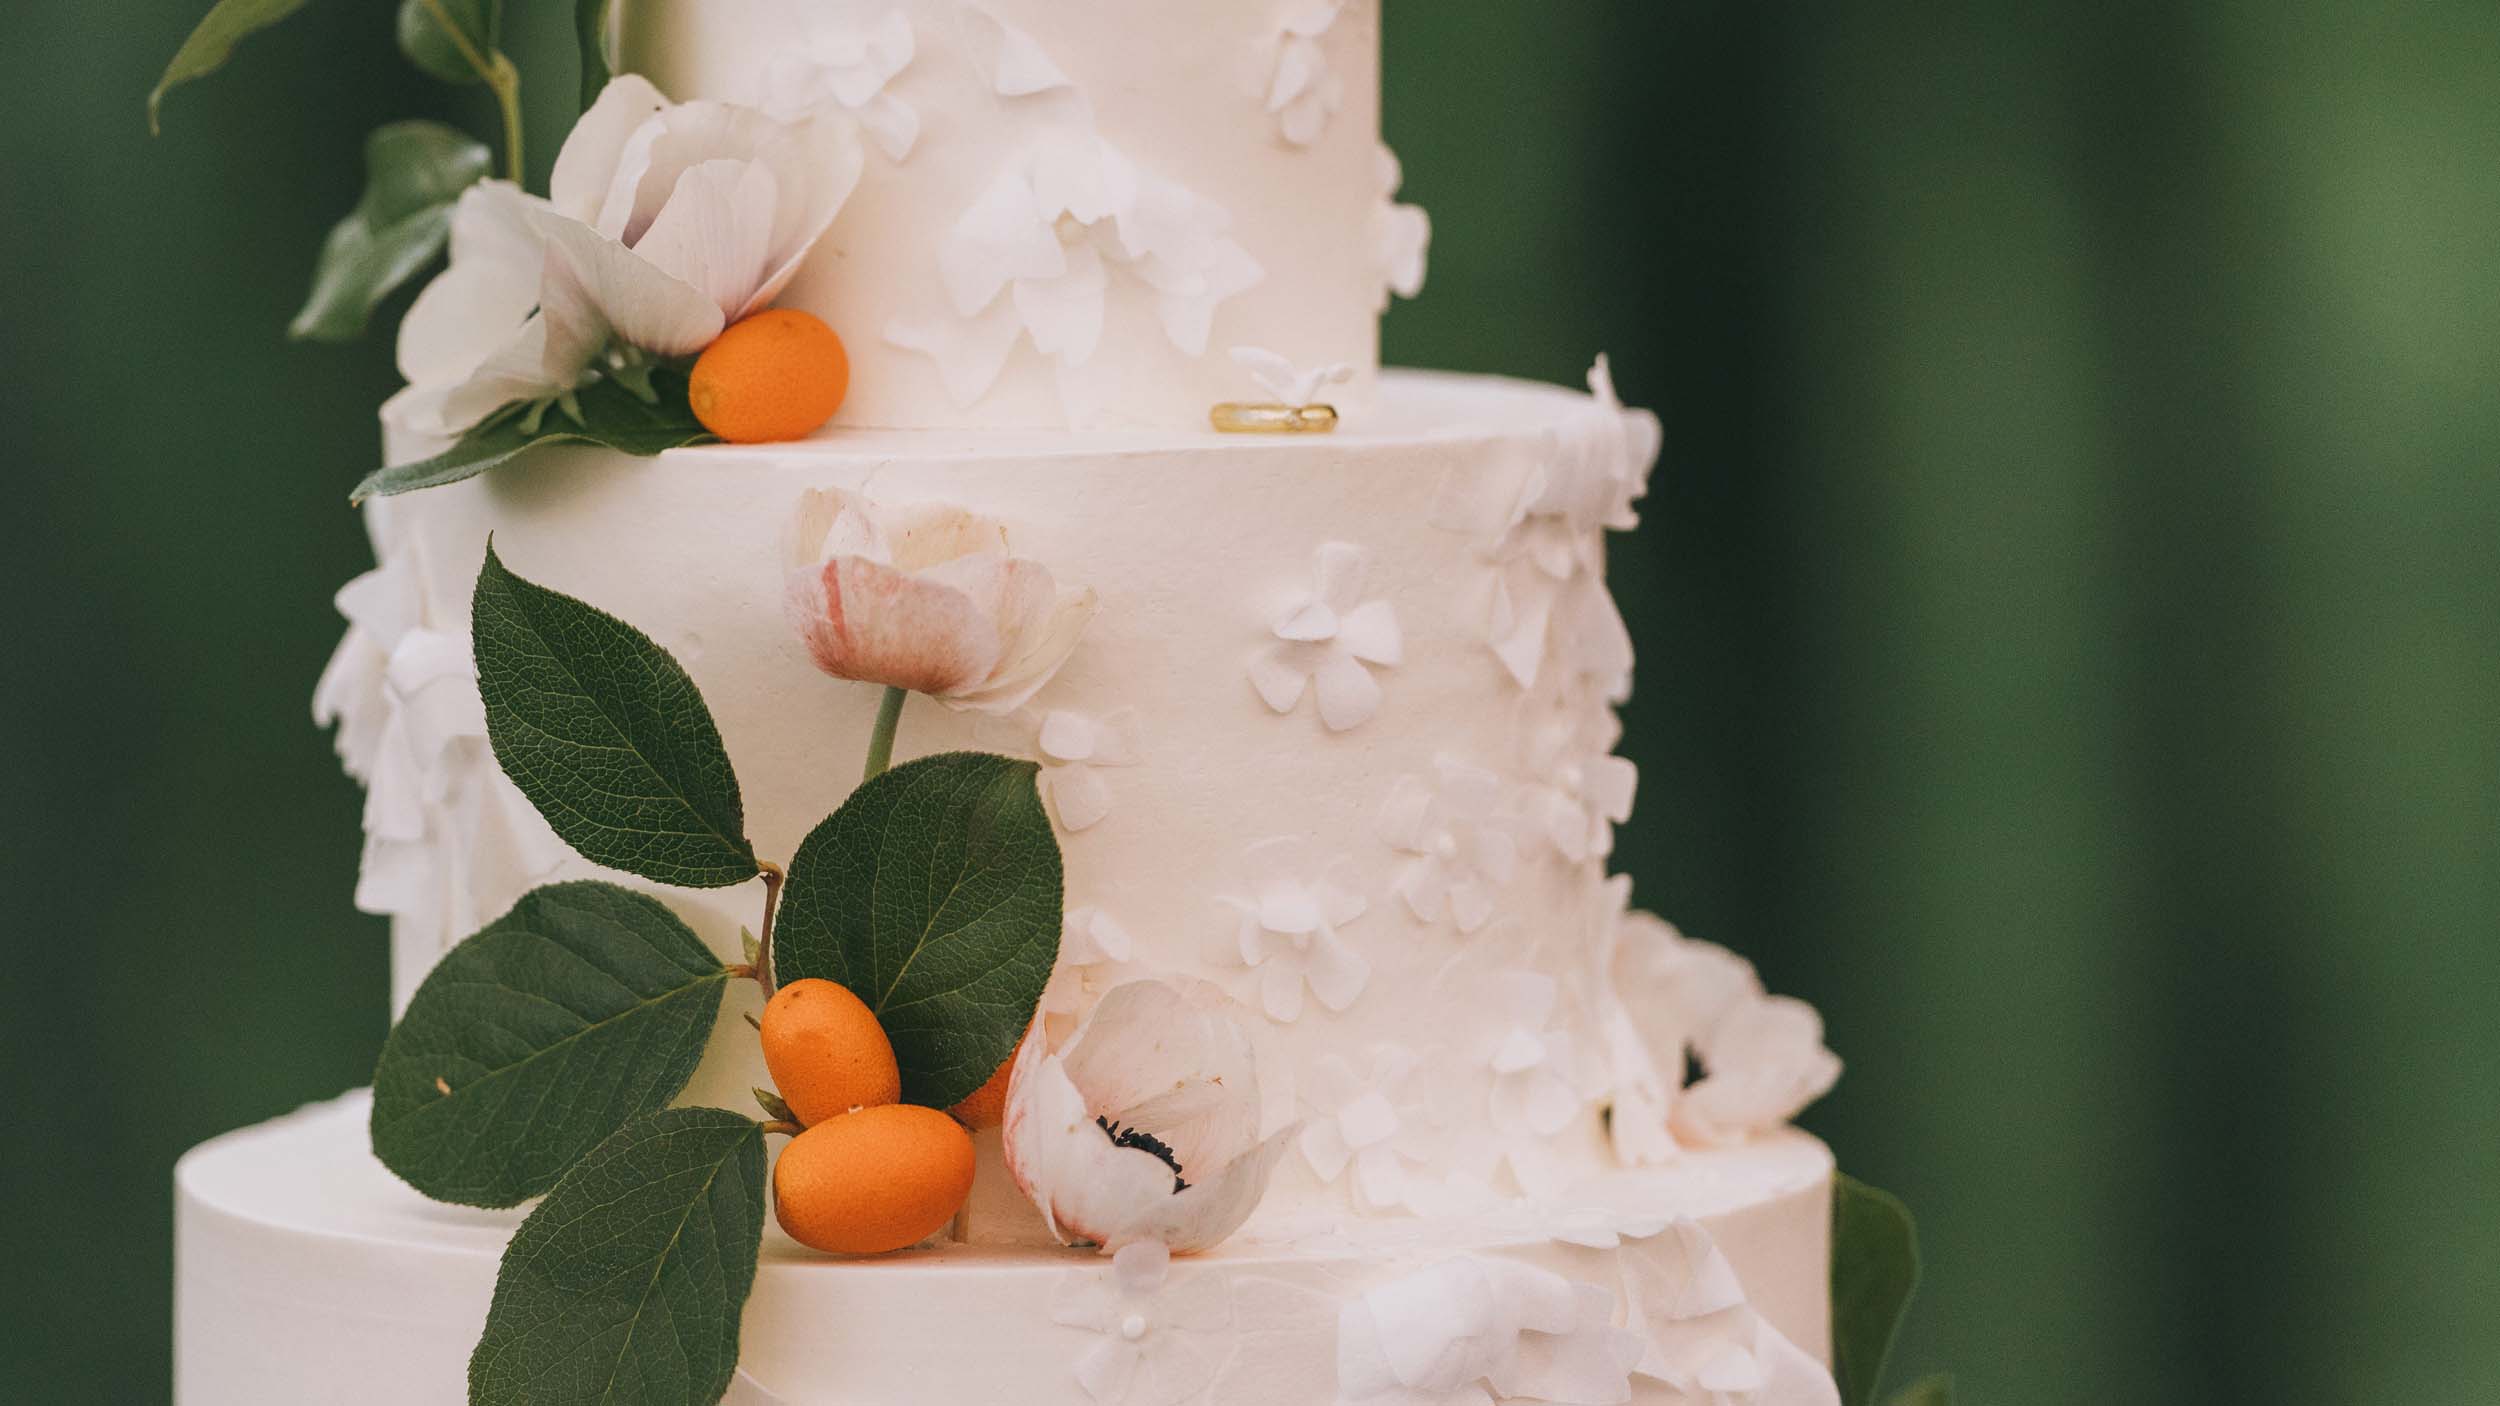 A three-tiered white wedding cake is decorated with anemones and kumquats still on the branch. 